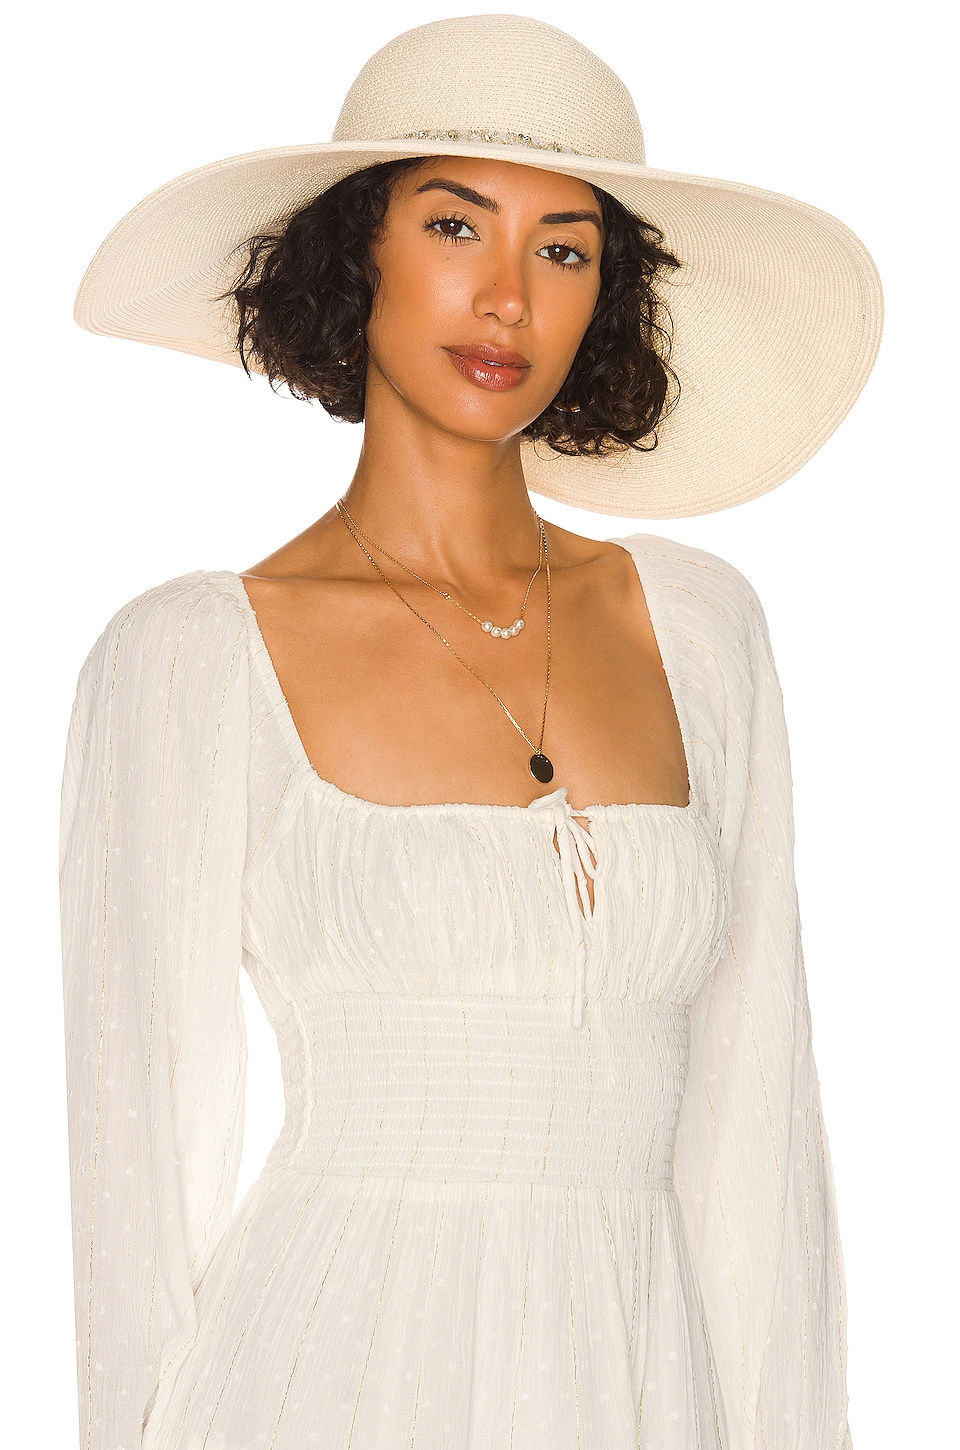 30 Chic Summer Hats for Every Activity | Who What Wear